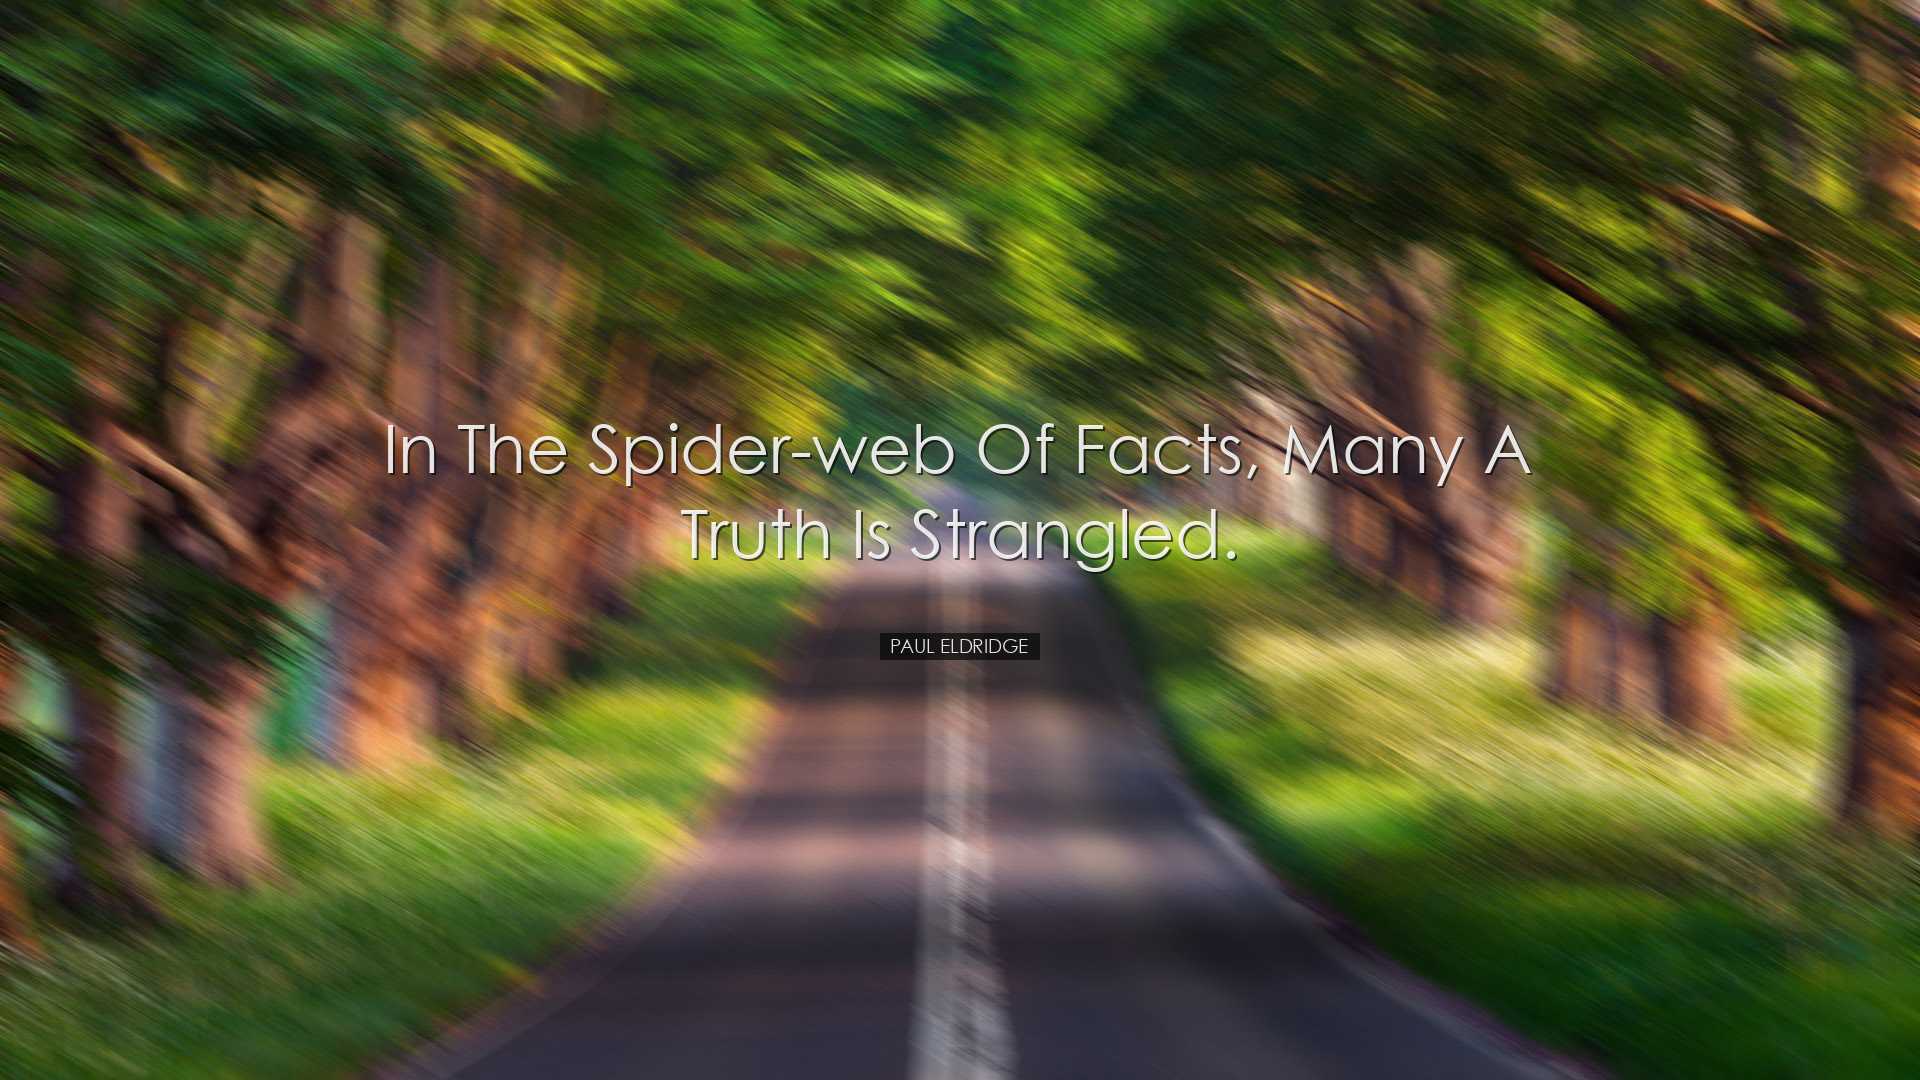 In the spider-web of facts, many a truth is strangled. - Paul Eldr